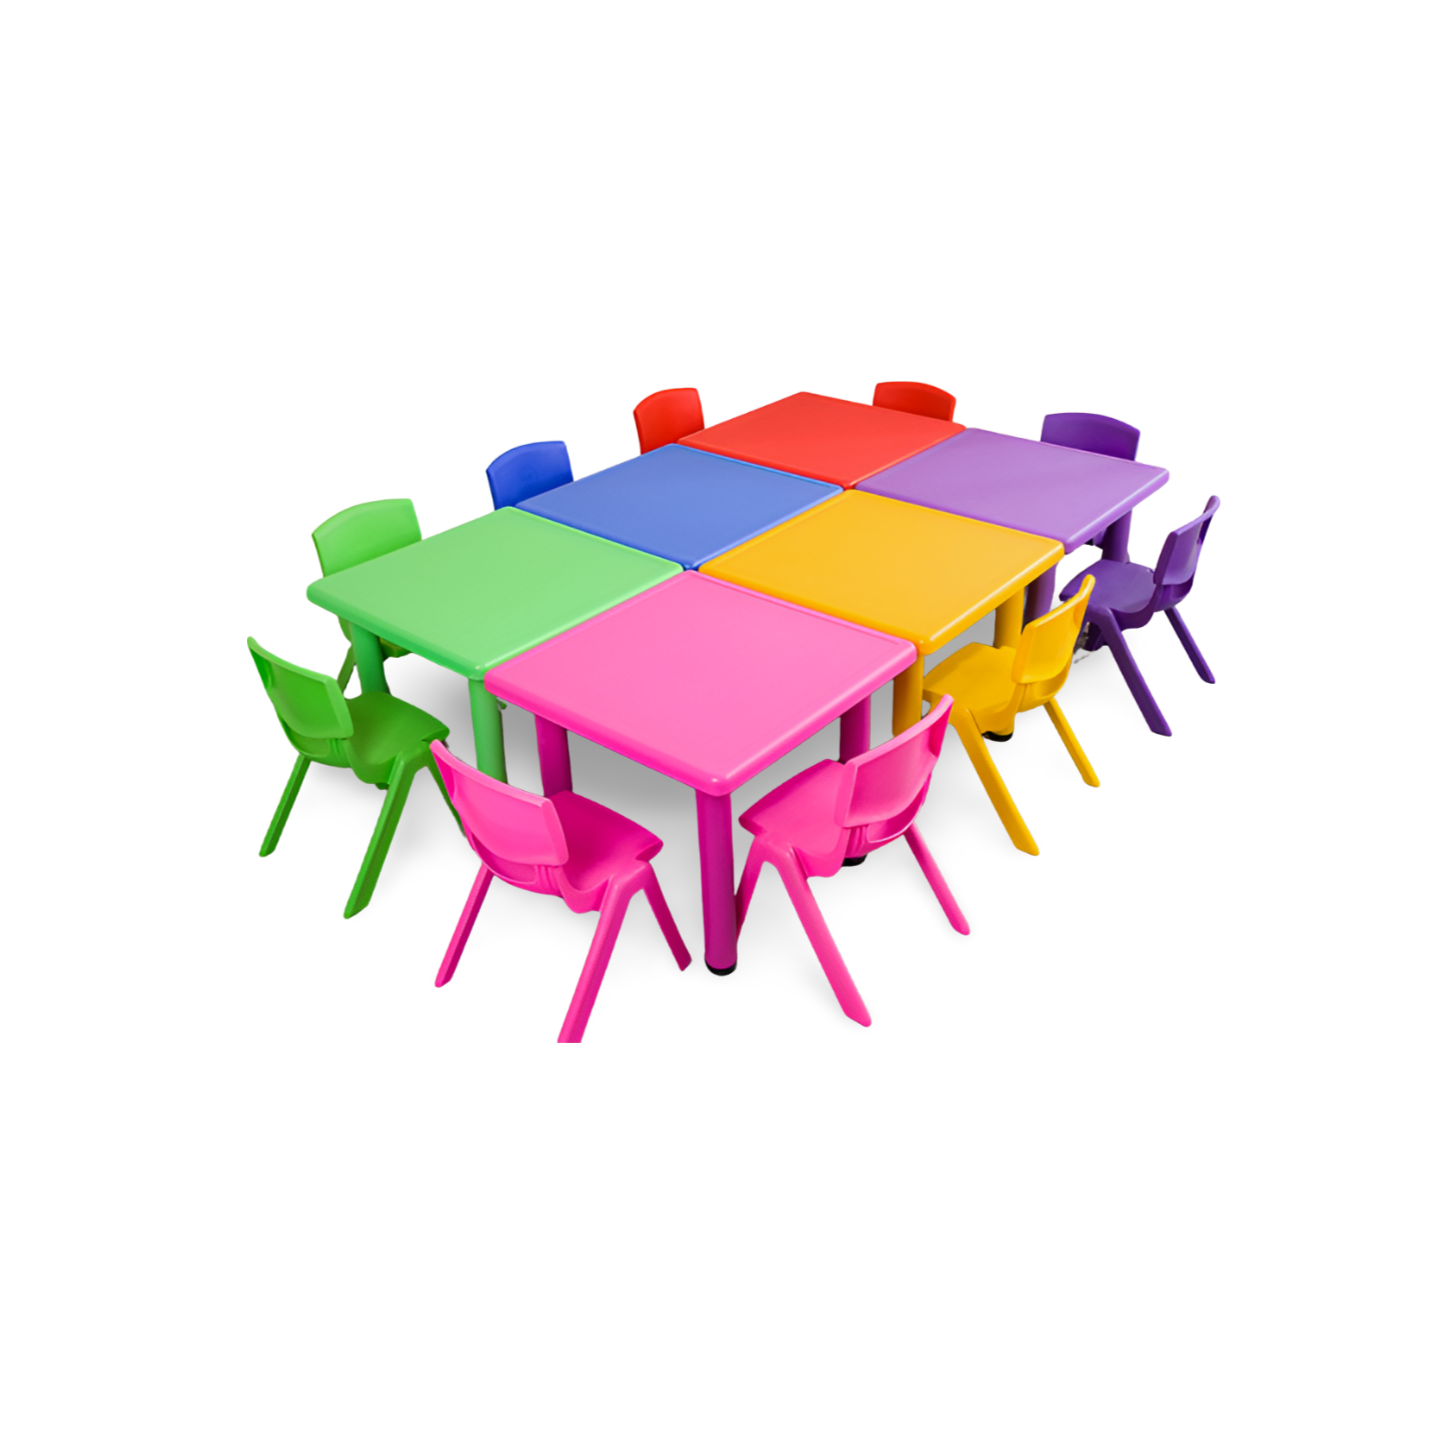 Finding the Perfect High-Quality Preschool Chair